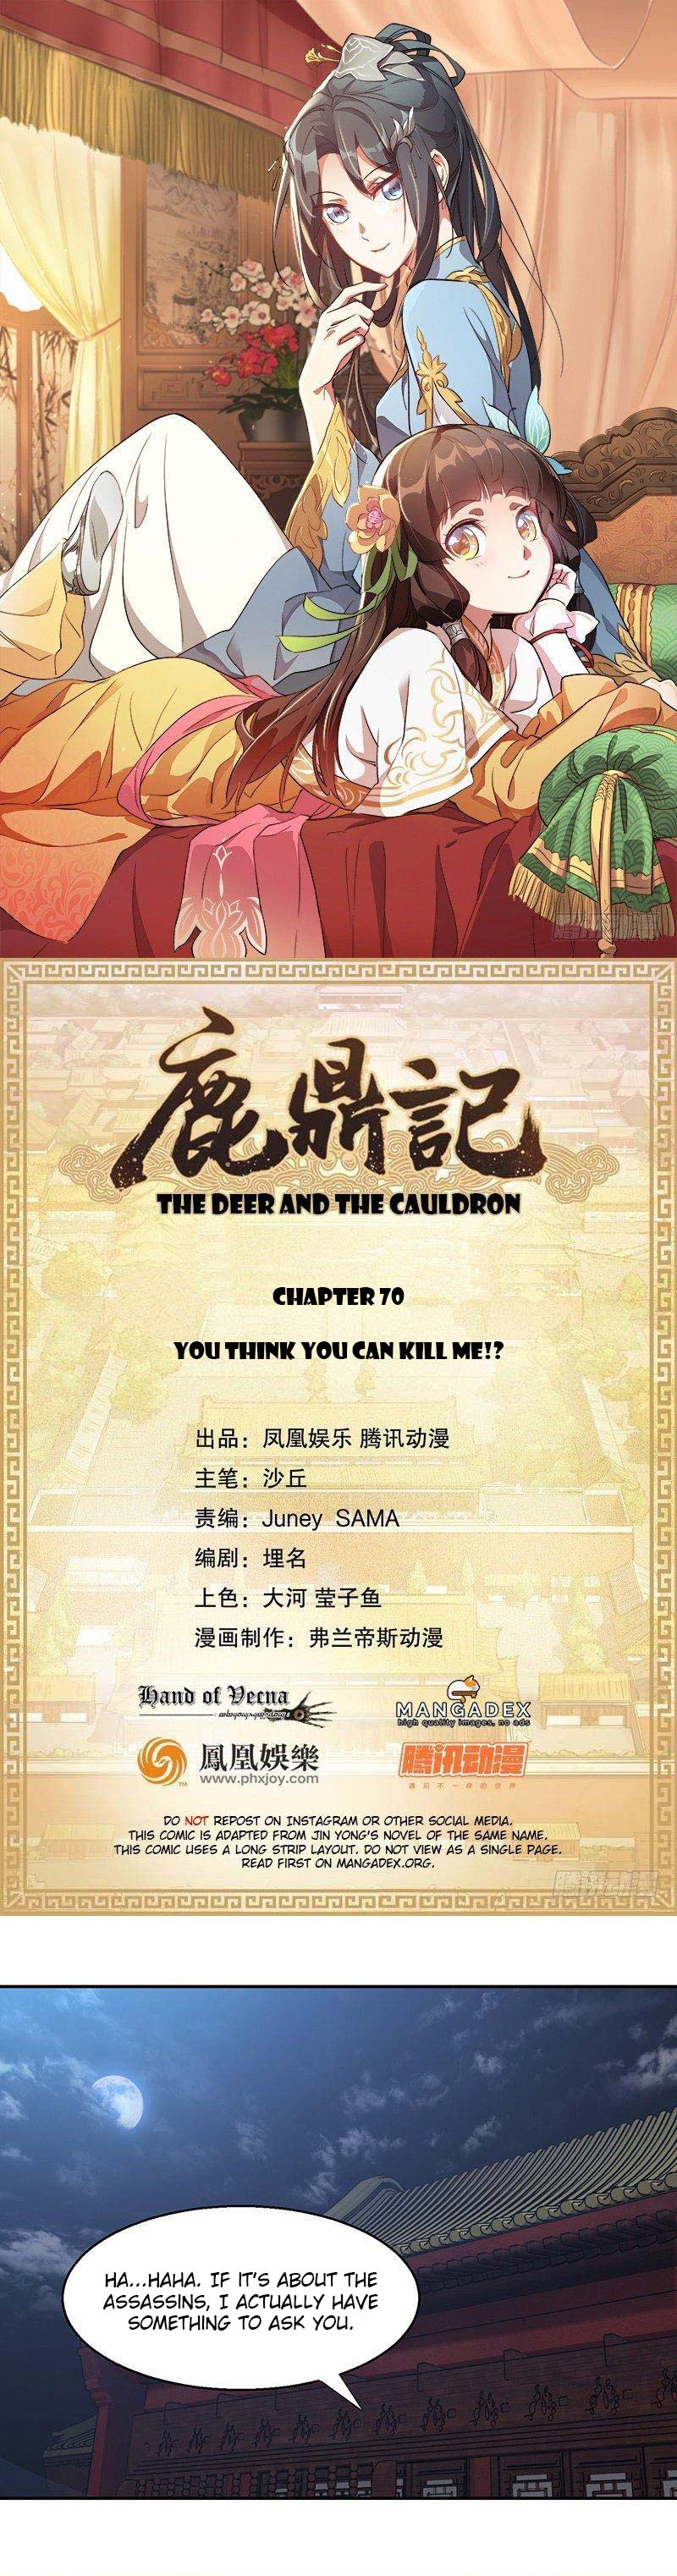 The Deer and the Cauldron Ch. 70 You Think You Can Kill Me!?